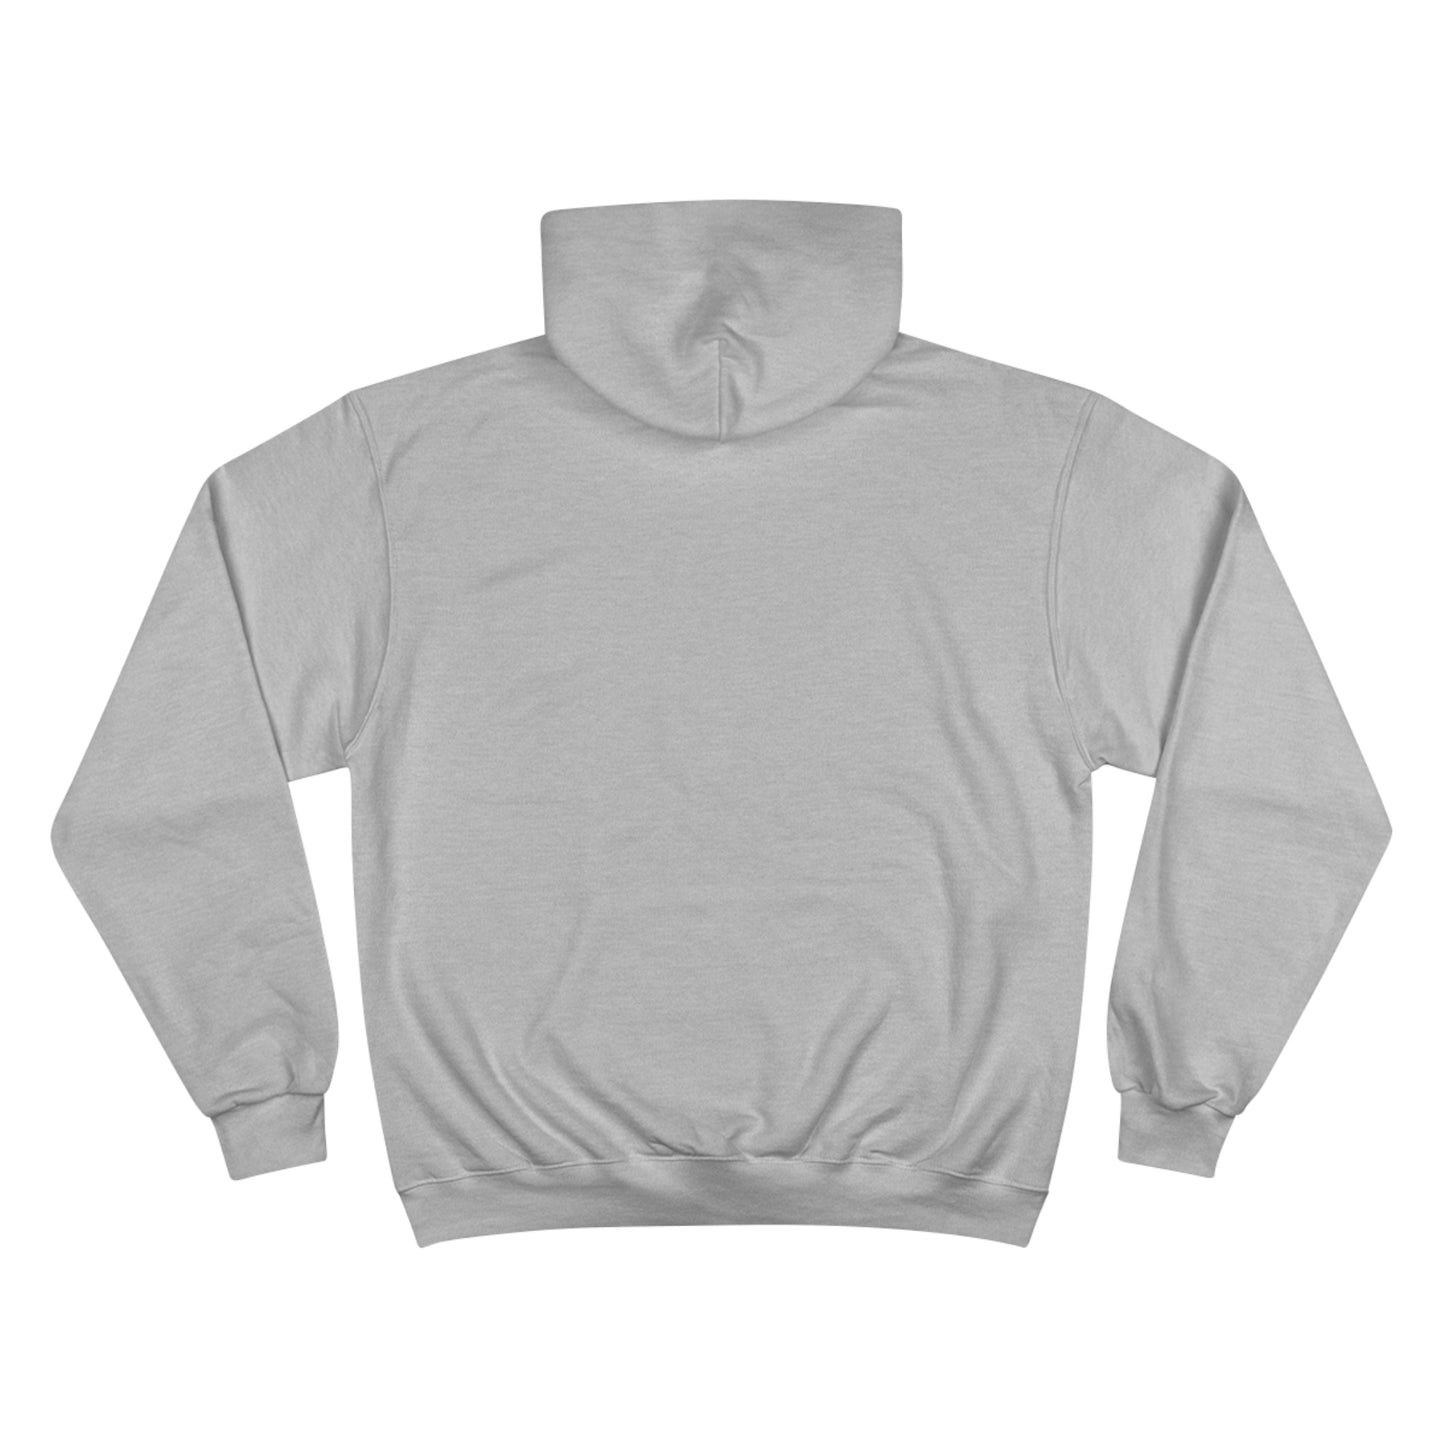 The Post And Nickel White Logo Champion Hoodie